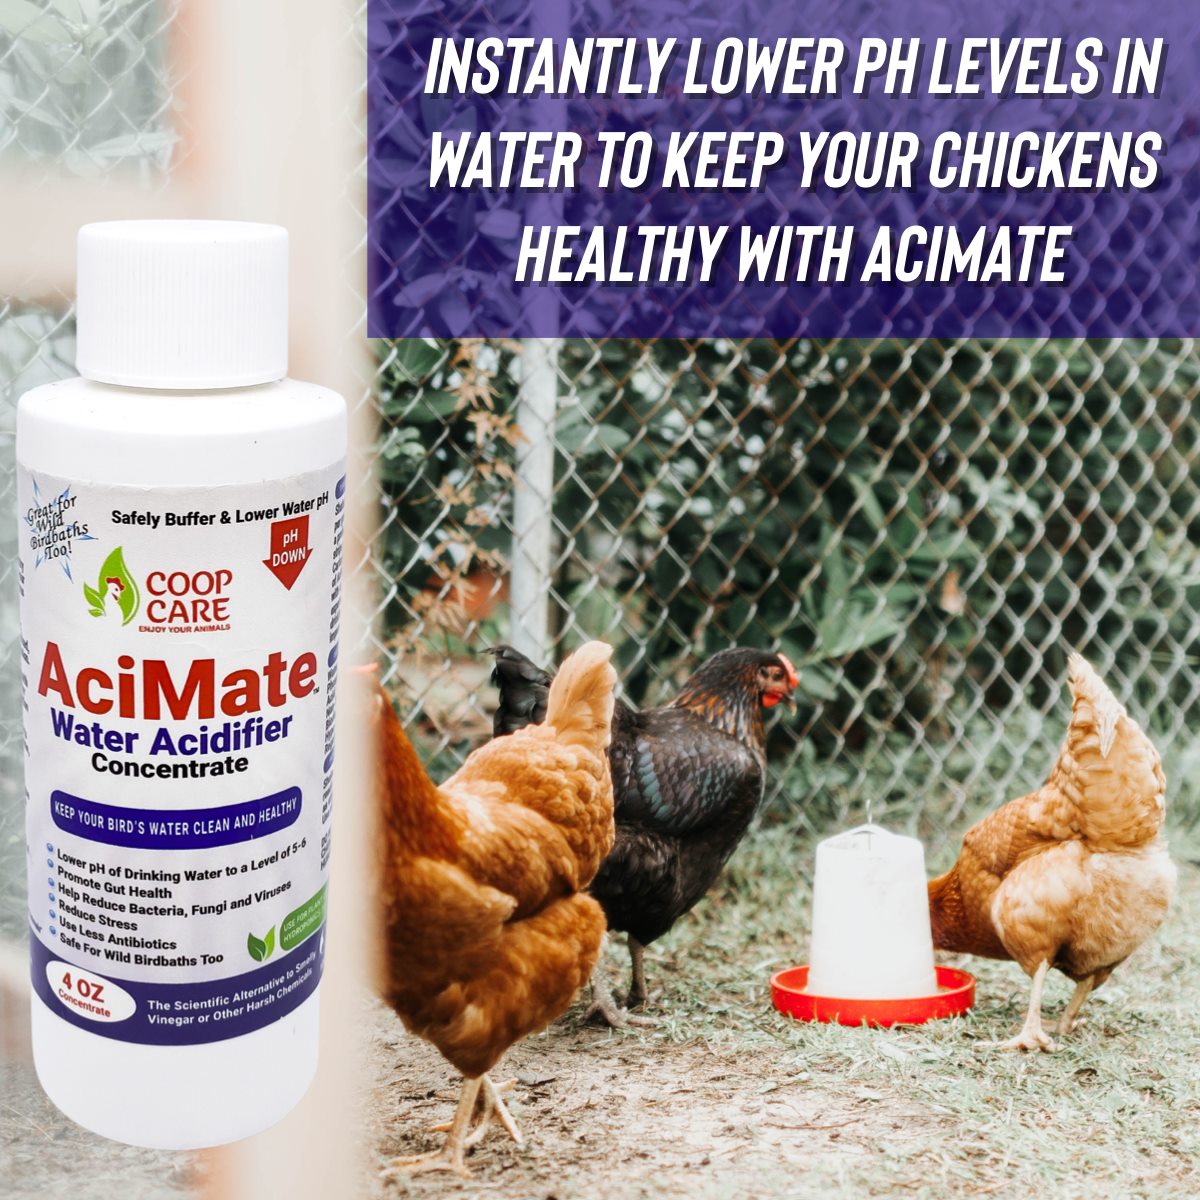 AciMate Water Acidifier Concentrate (4oz) – Water Quality is Essential to Poultry Health. Optimize Water pH, Eliminate BioFilm & Algae Growth in Your Waterers. 10x Stronger than Apple Cider Vinegar! Pleasant Taste. Free pH test strips included!